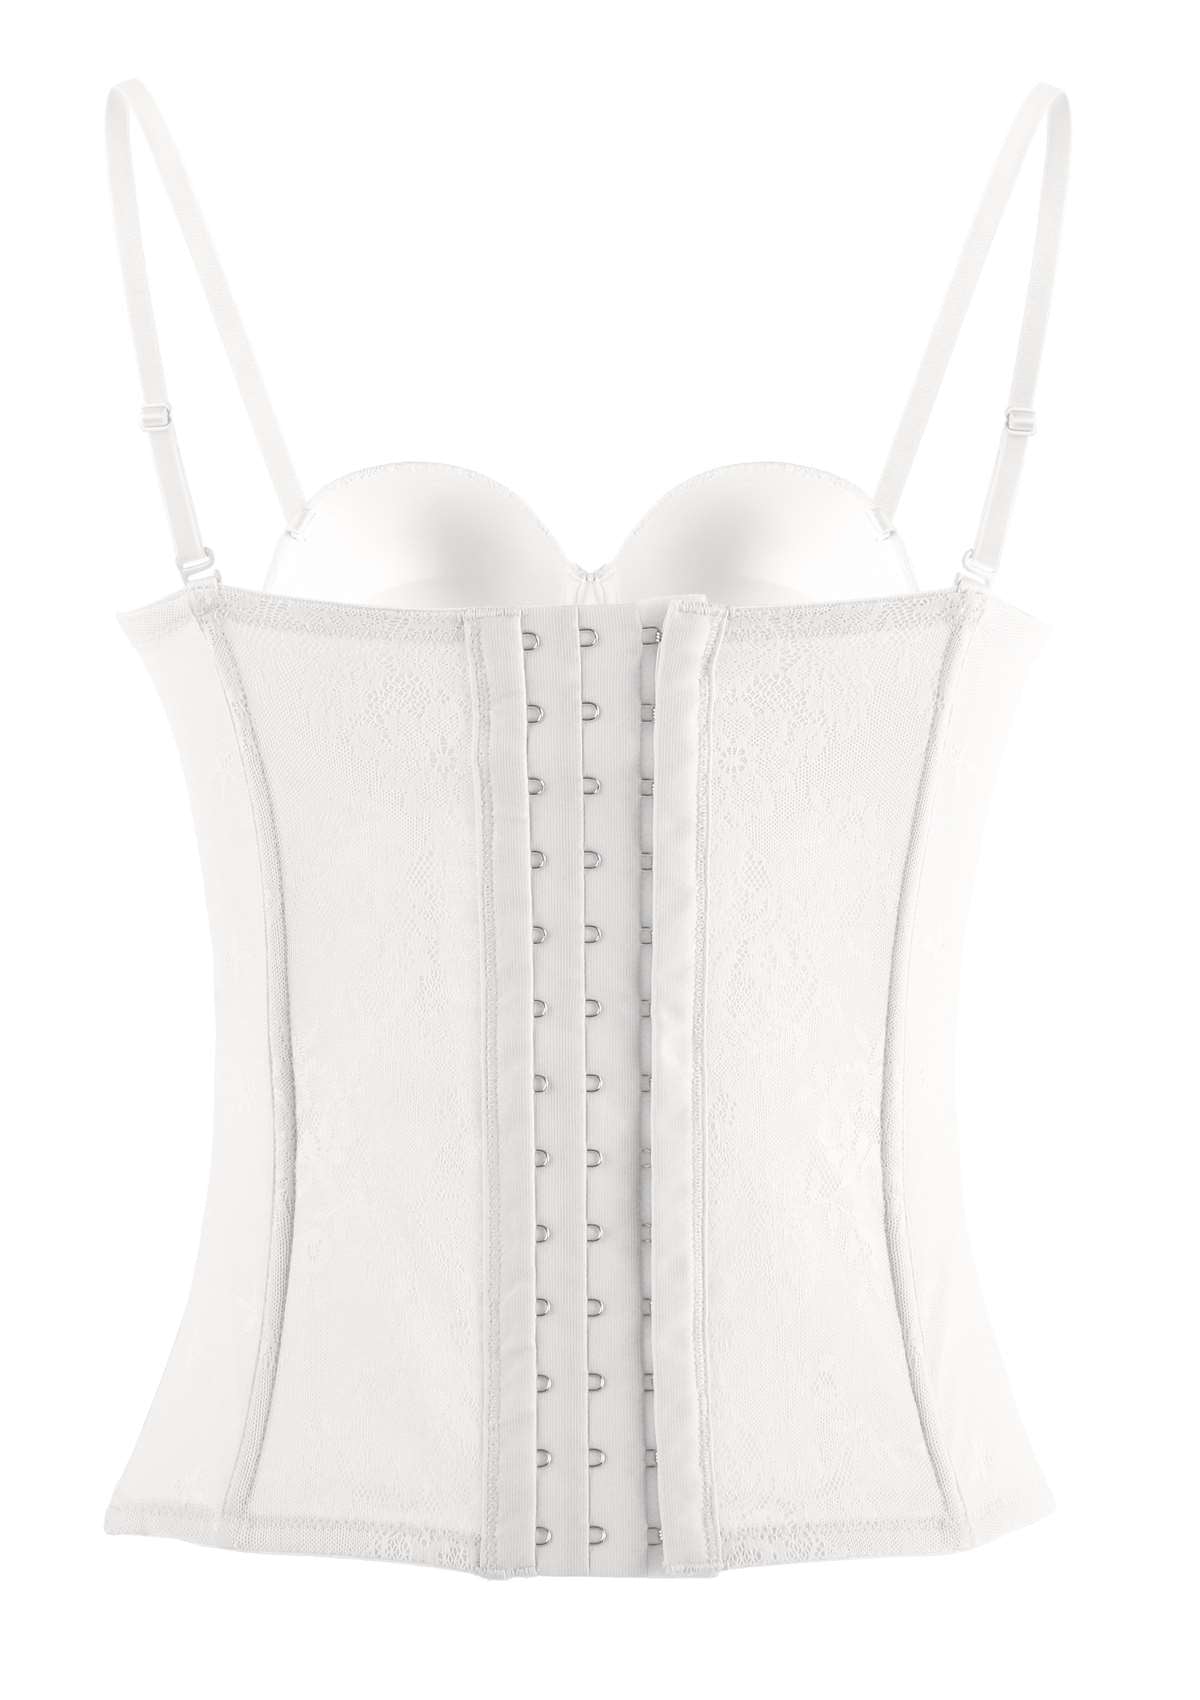 HSIA Gracious Vintage-Inspired Lace Overbust Elegant Corset Bustier - XXL / White